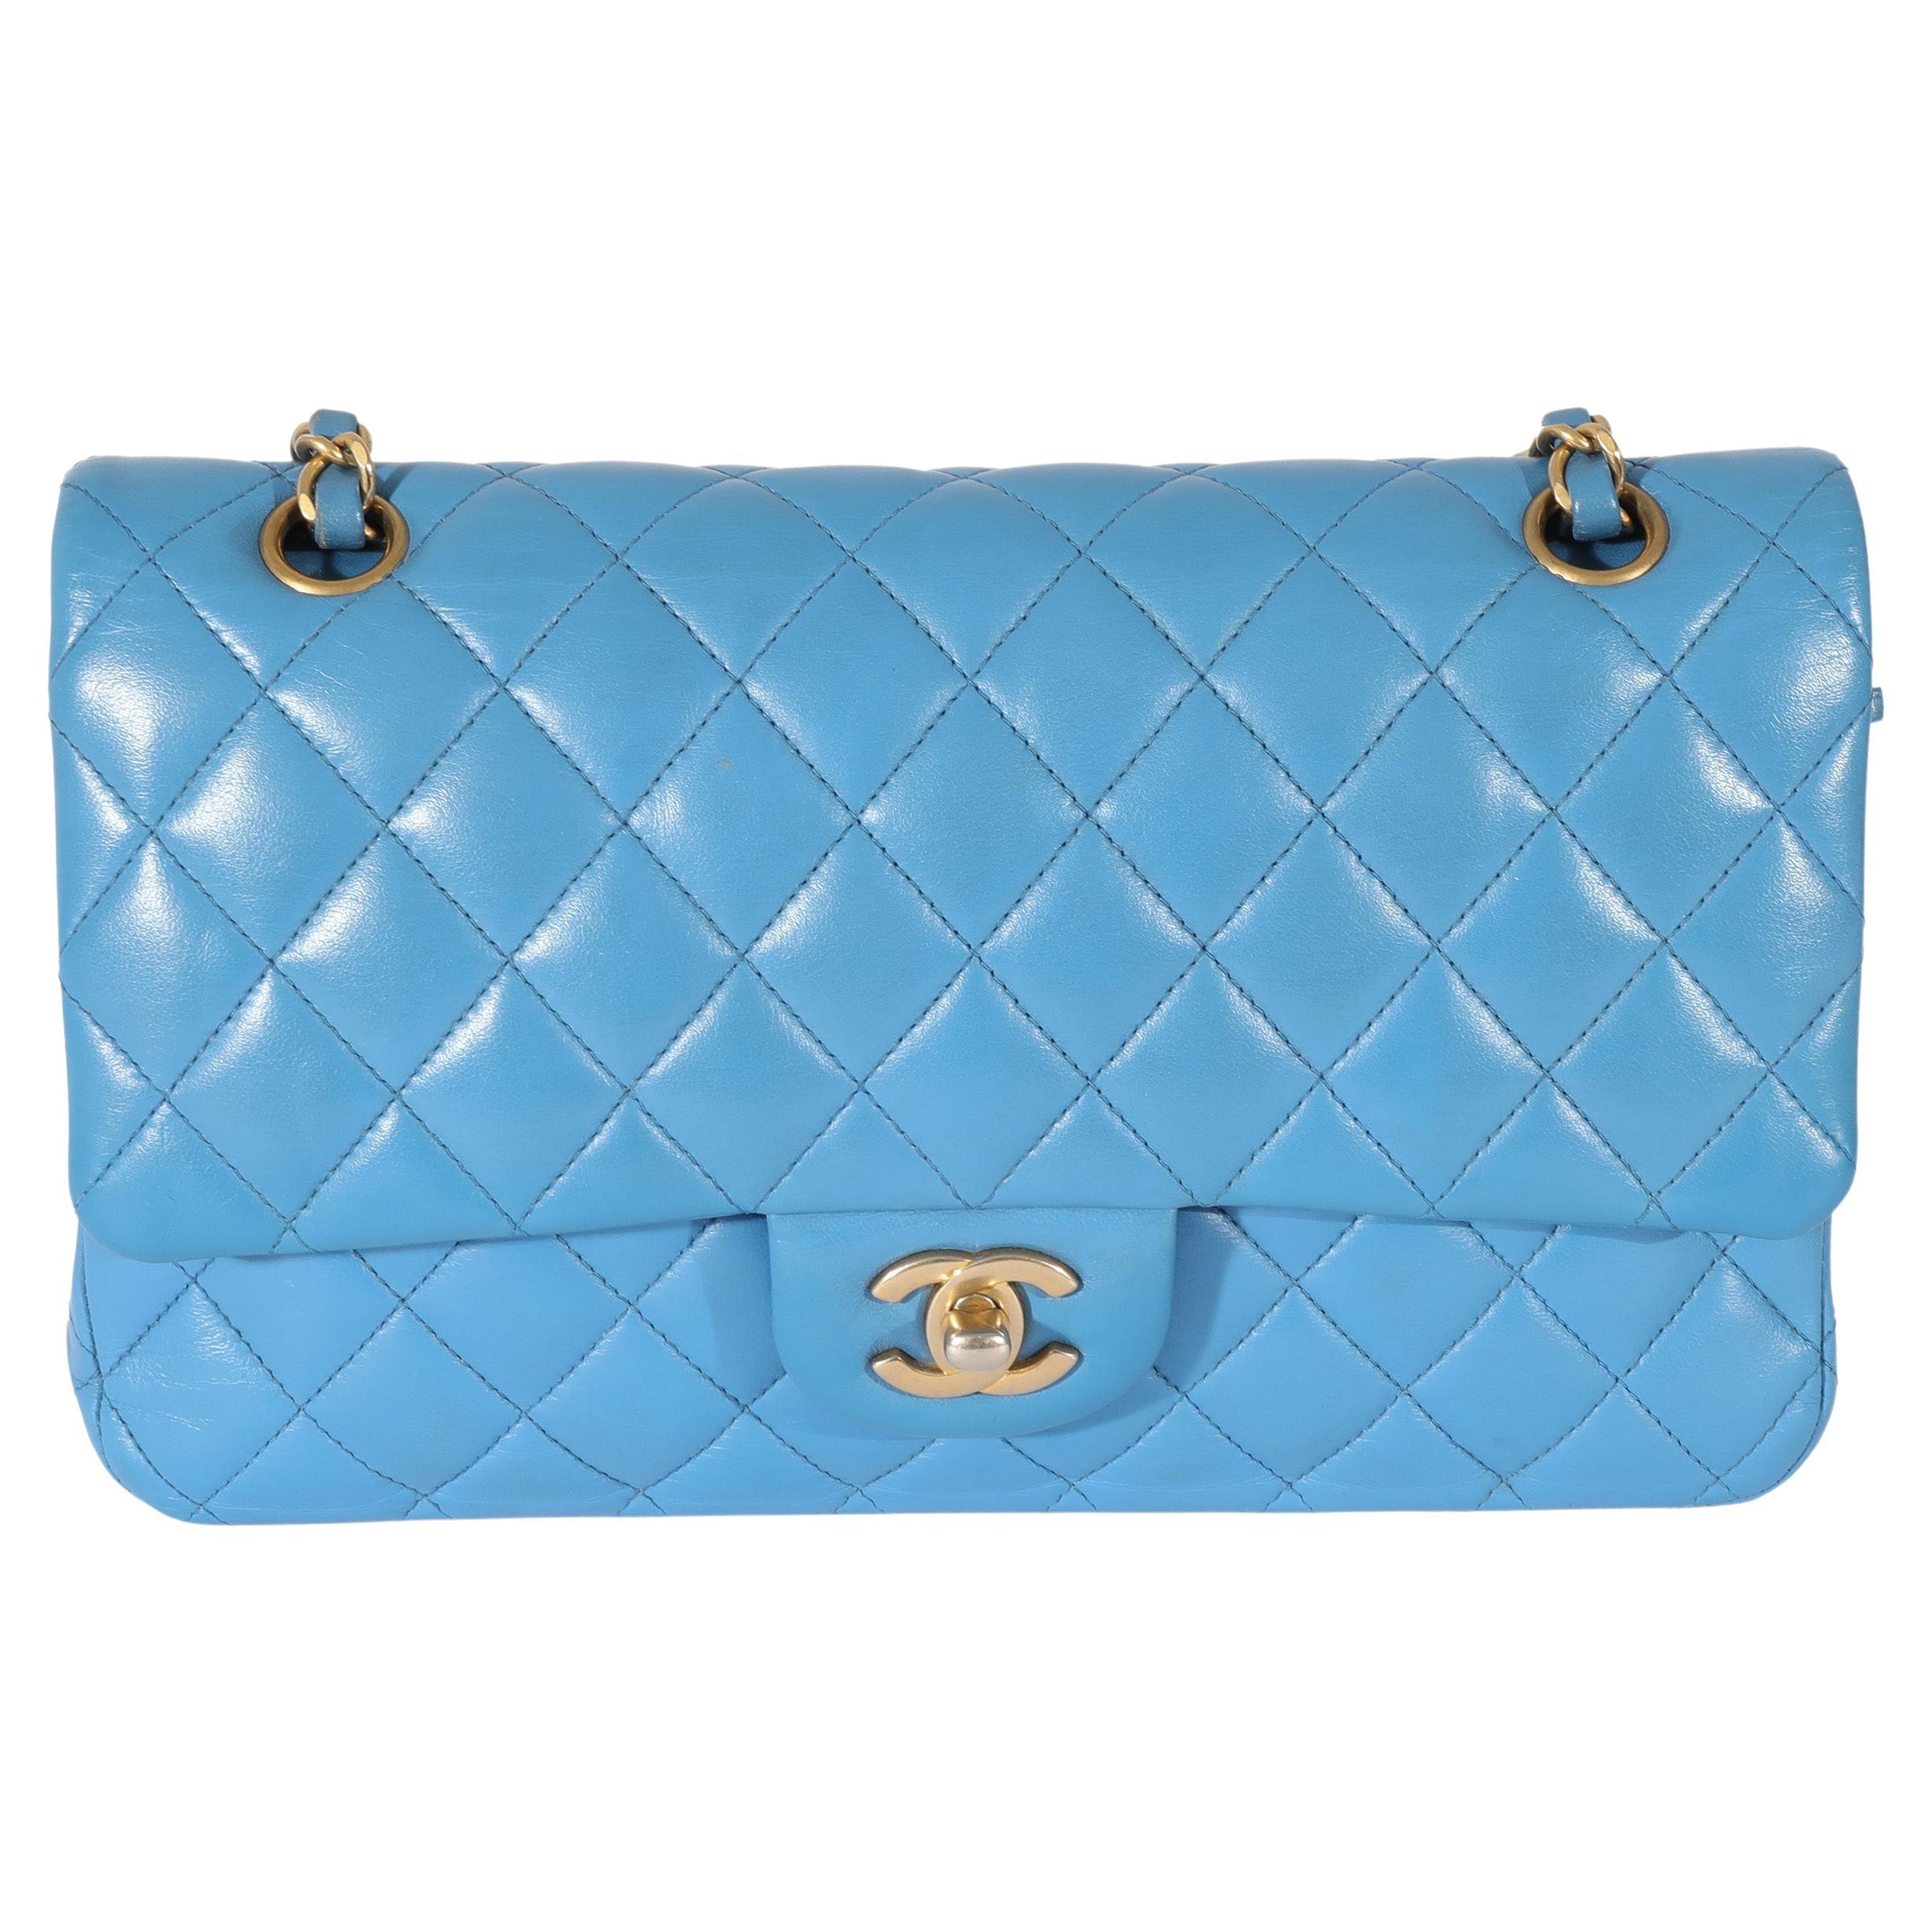 Chanel Lambskin Blue Quilted Medium Double Flap Bag For Sale